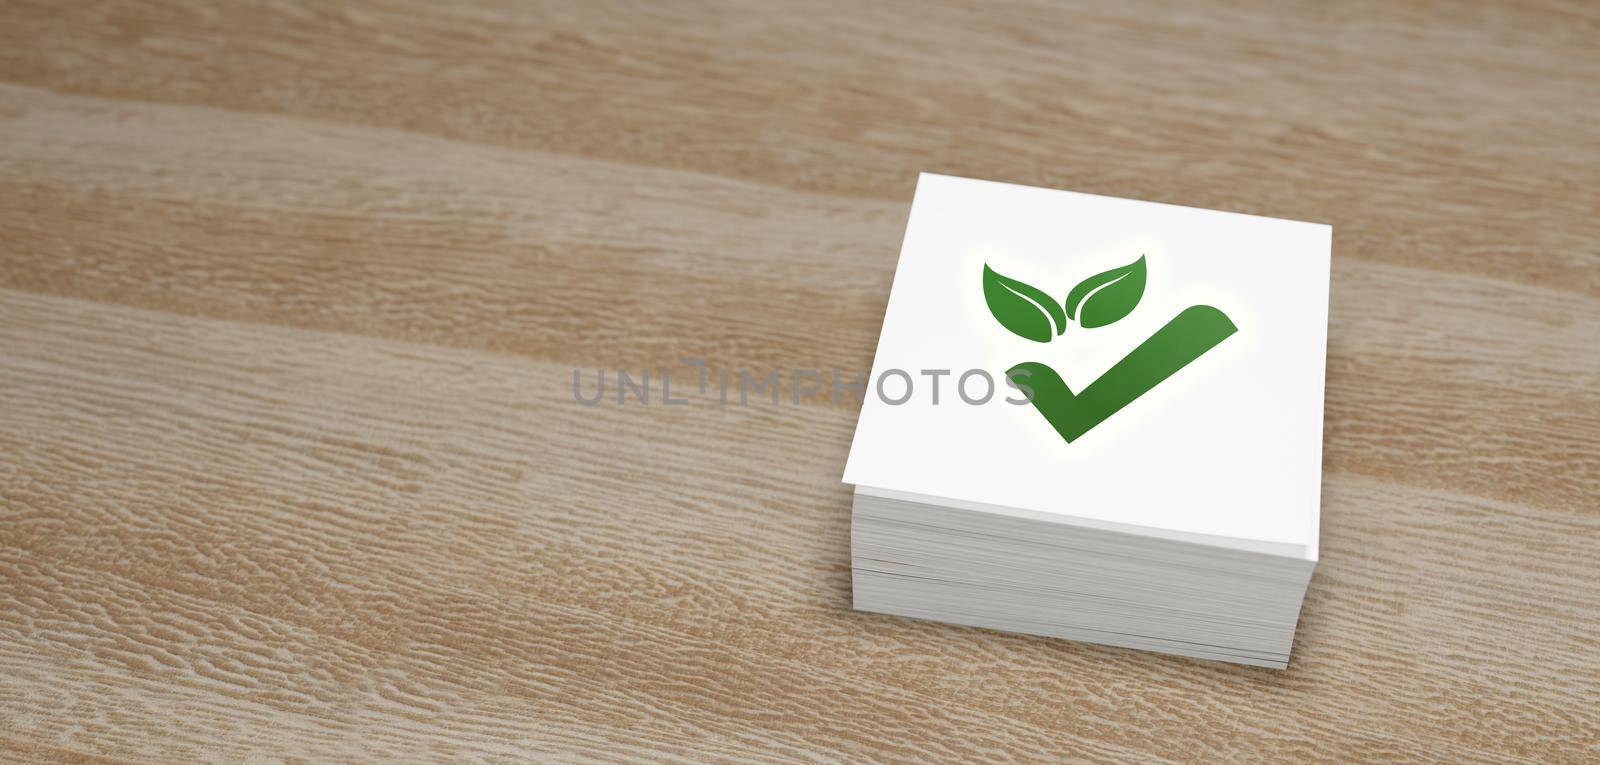 ECO Approve sign or symbol on paper 3D Render by yay_lmrb